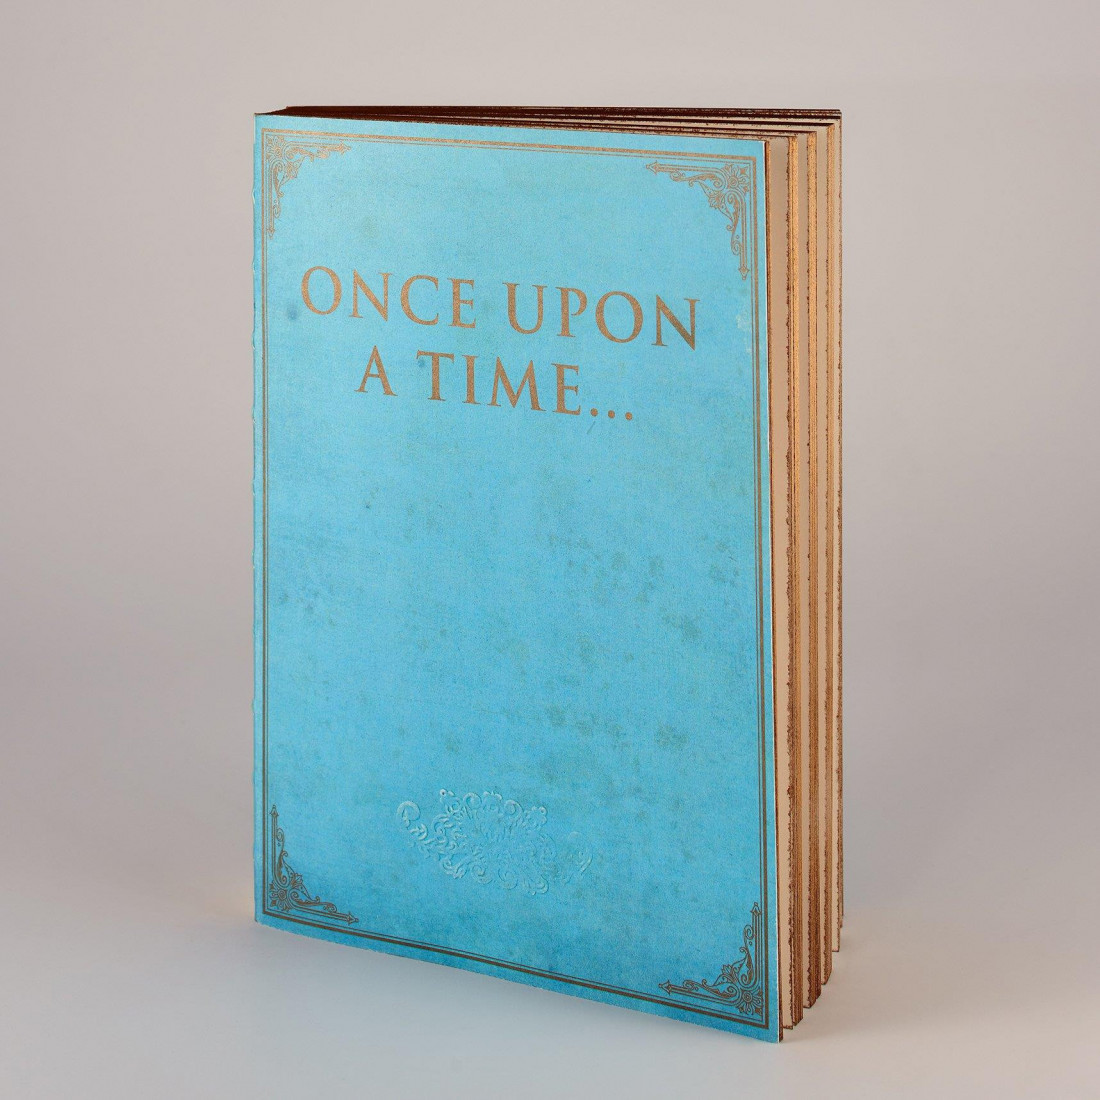 ANTIQUE NOTEBOOK Once upon a time LIBRI MUTI